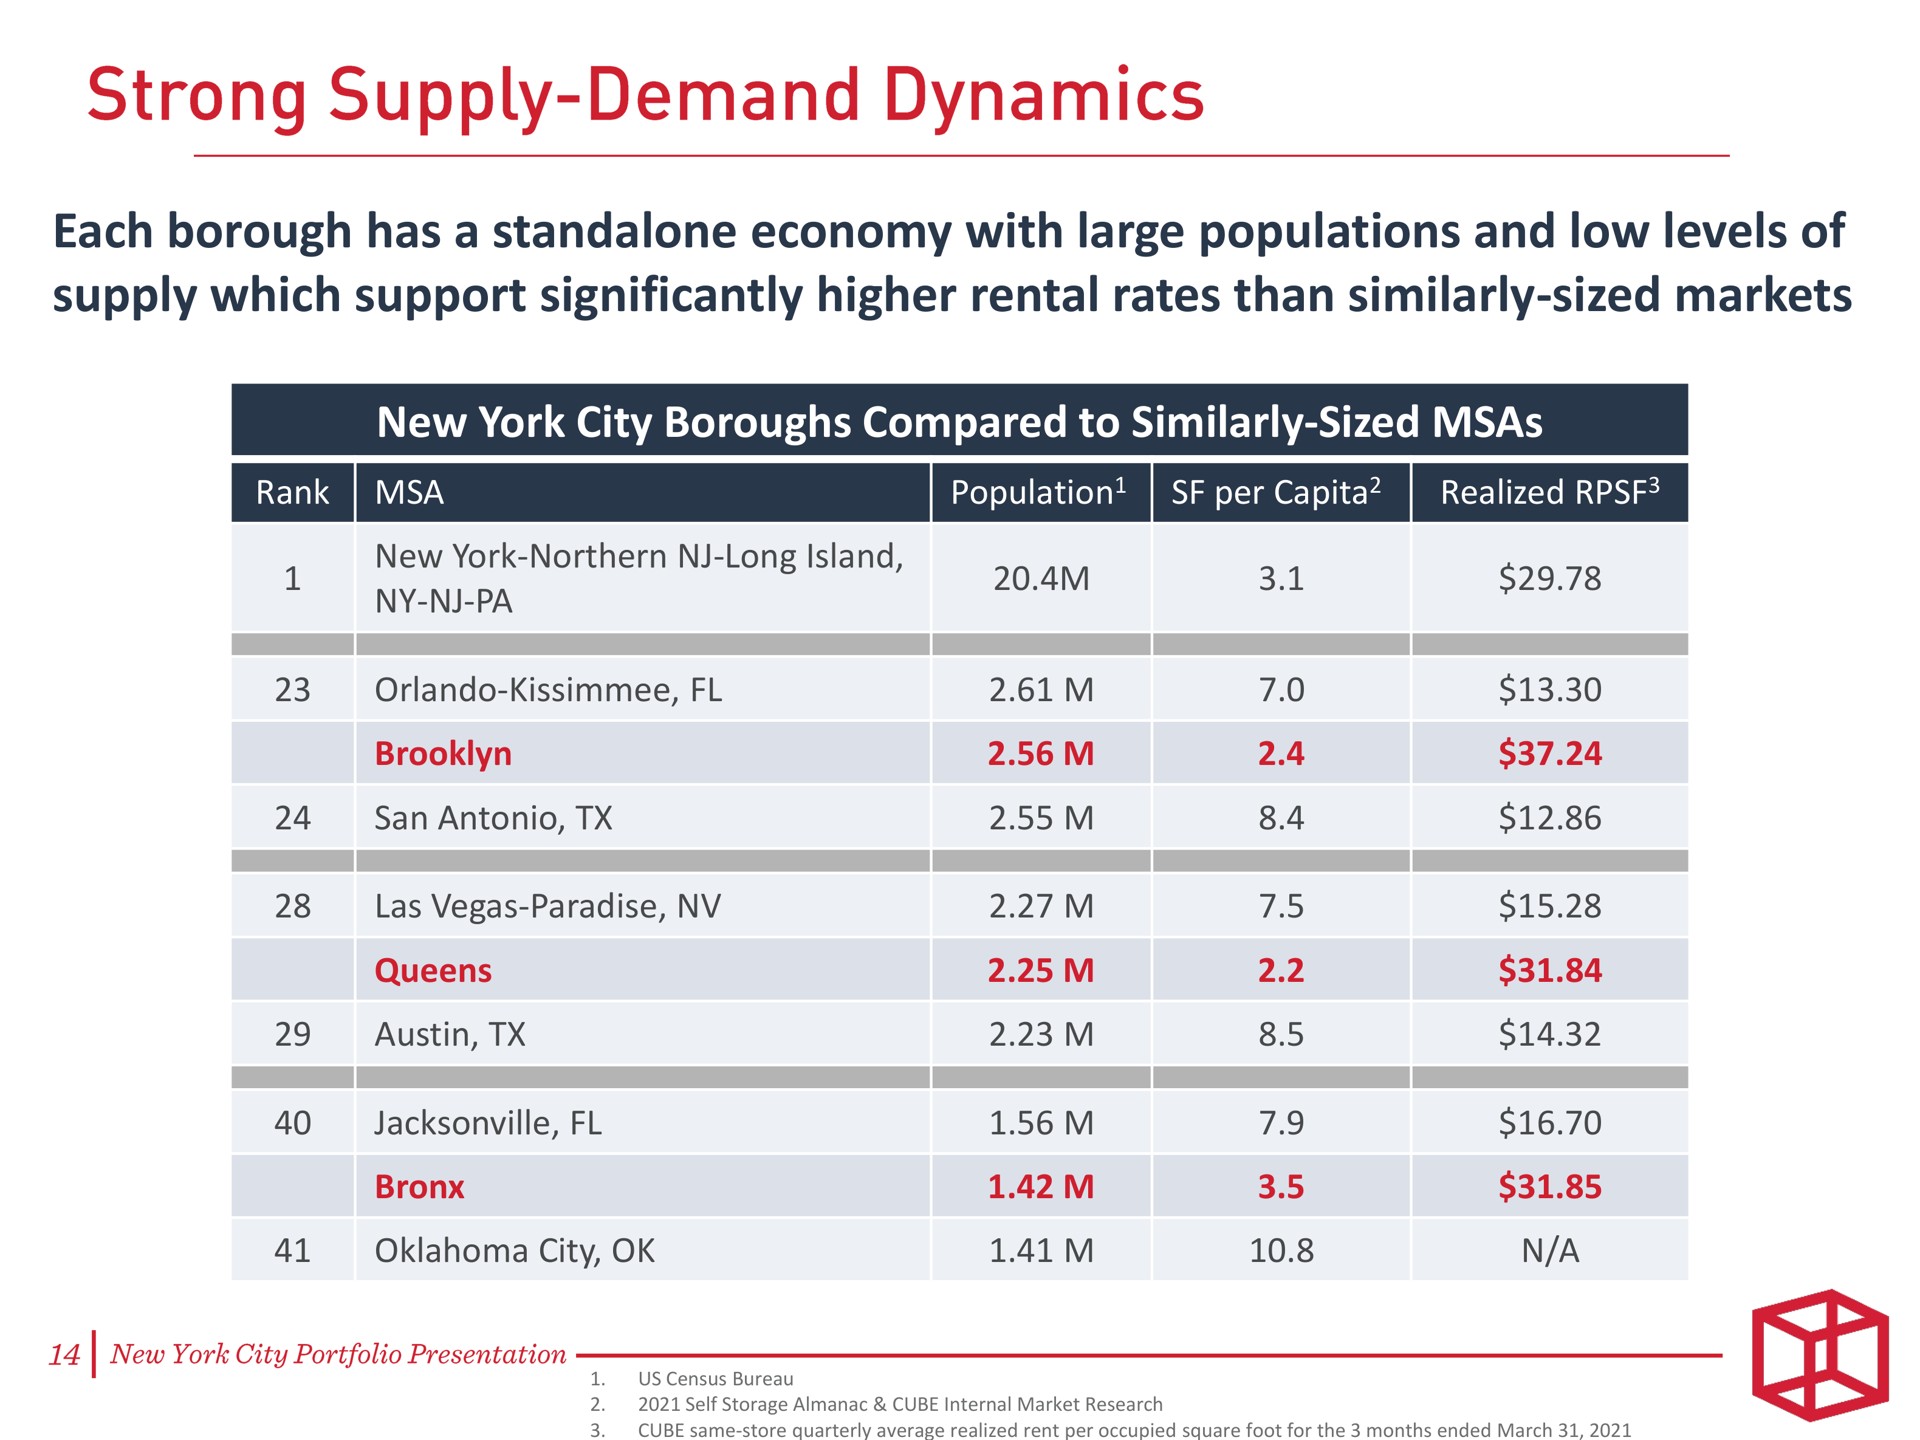 each borough has a economy with large populations and low levels of supply which support significantly higher rental rates than similarly sized markets strong supply demand dynamics | CubeSmart